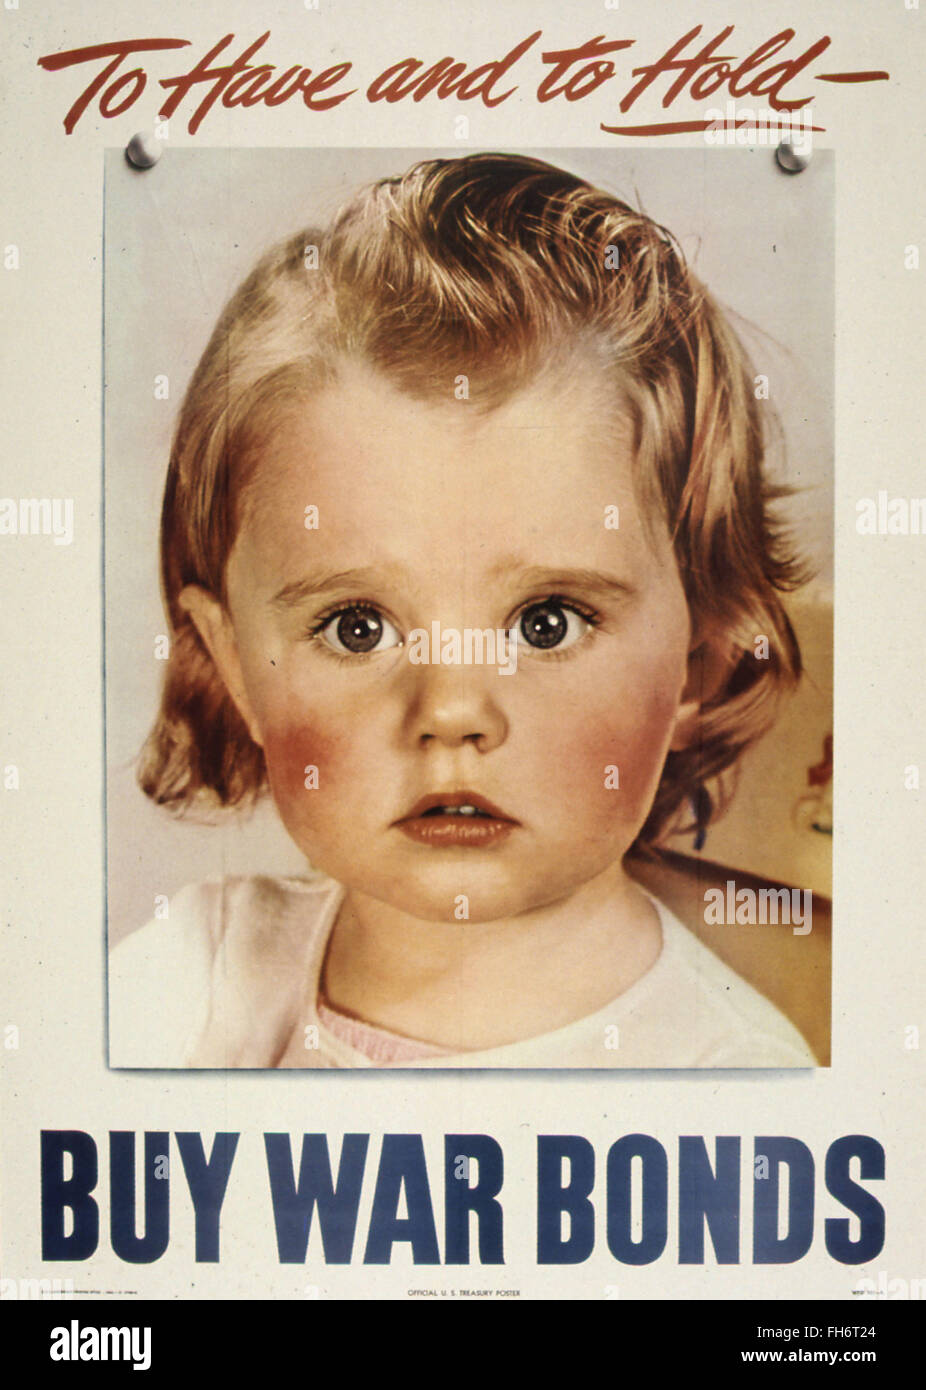 To Have and To Hold - US Propaganda Poster - WWII Stock Photo